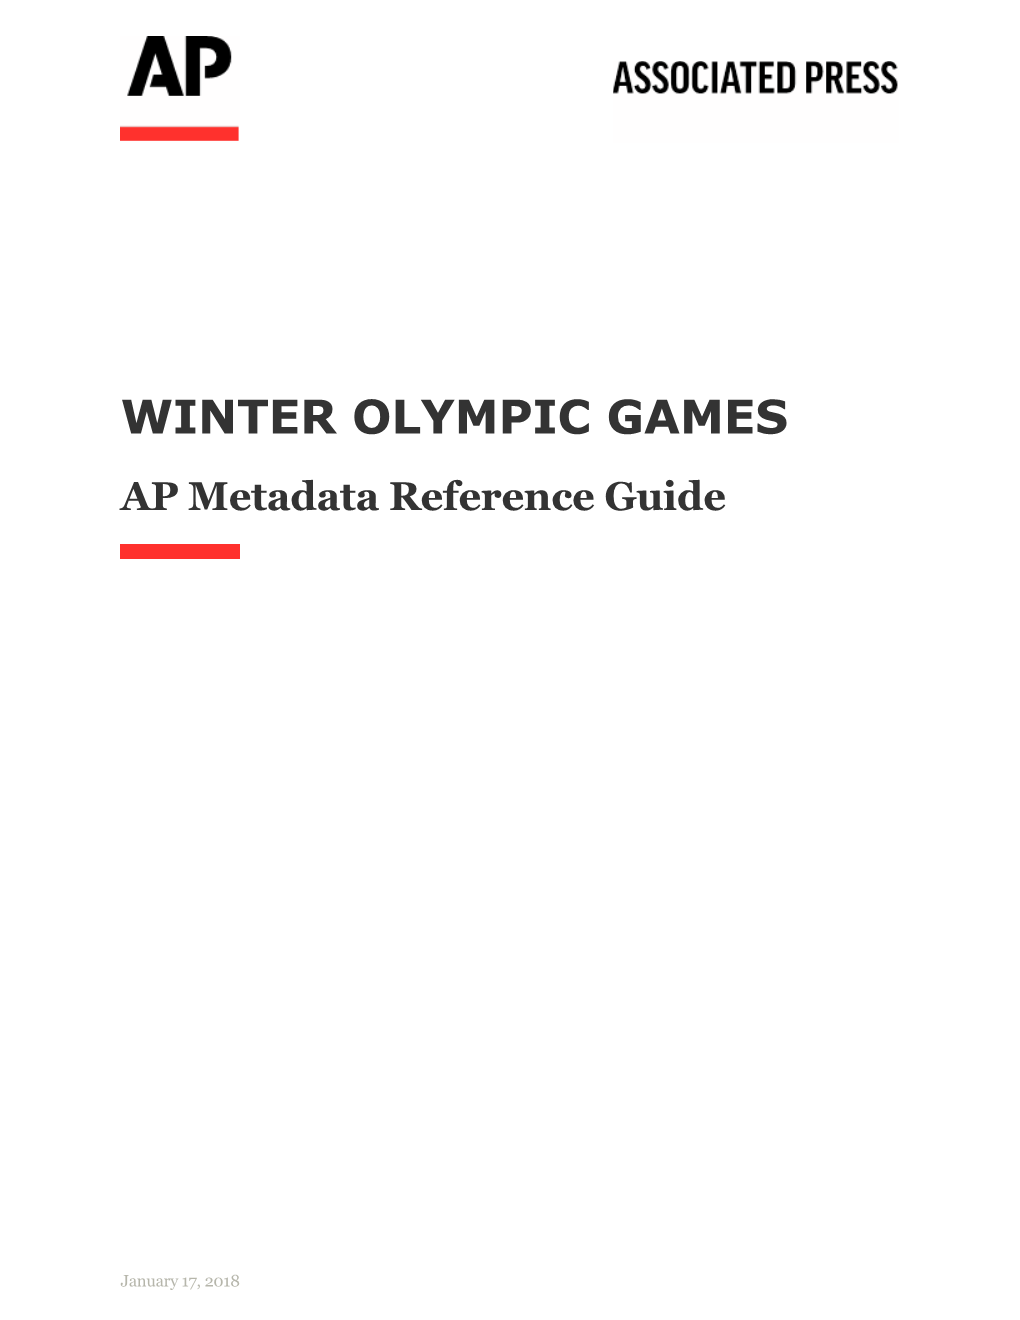 WINTER OLYMPIC GAMES AP Metadata Reference Guide